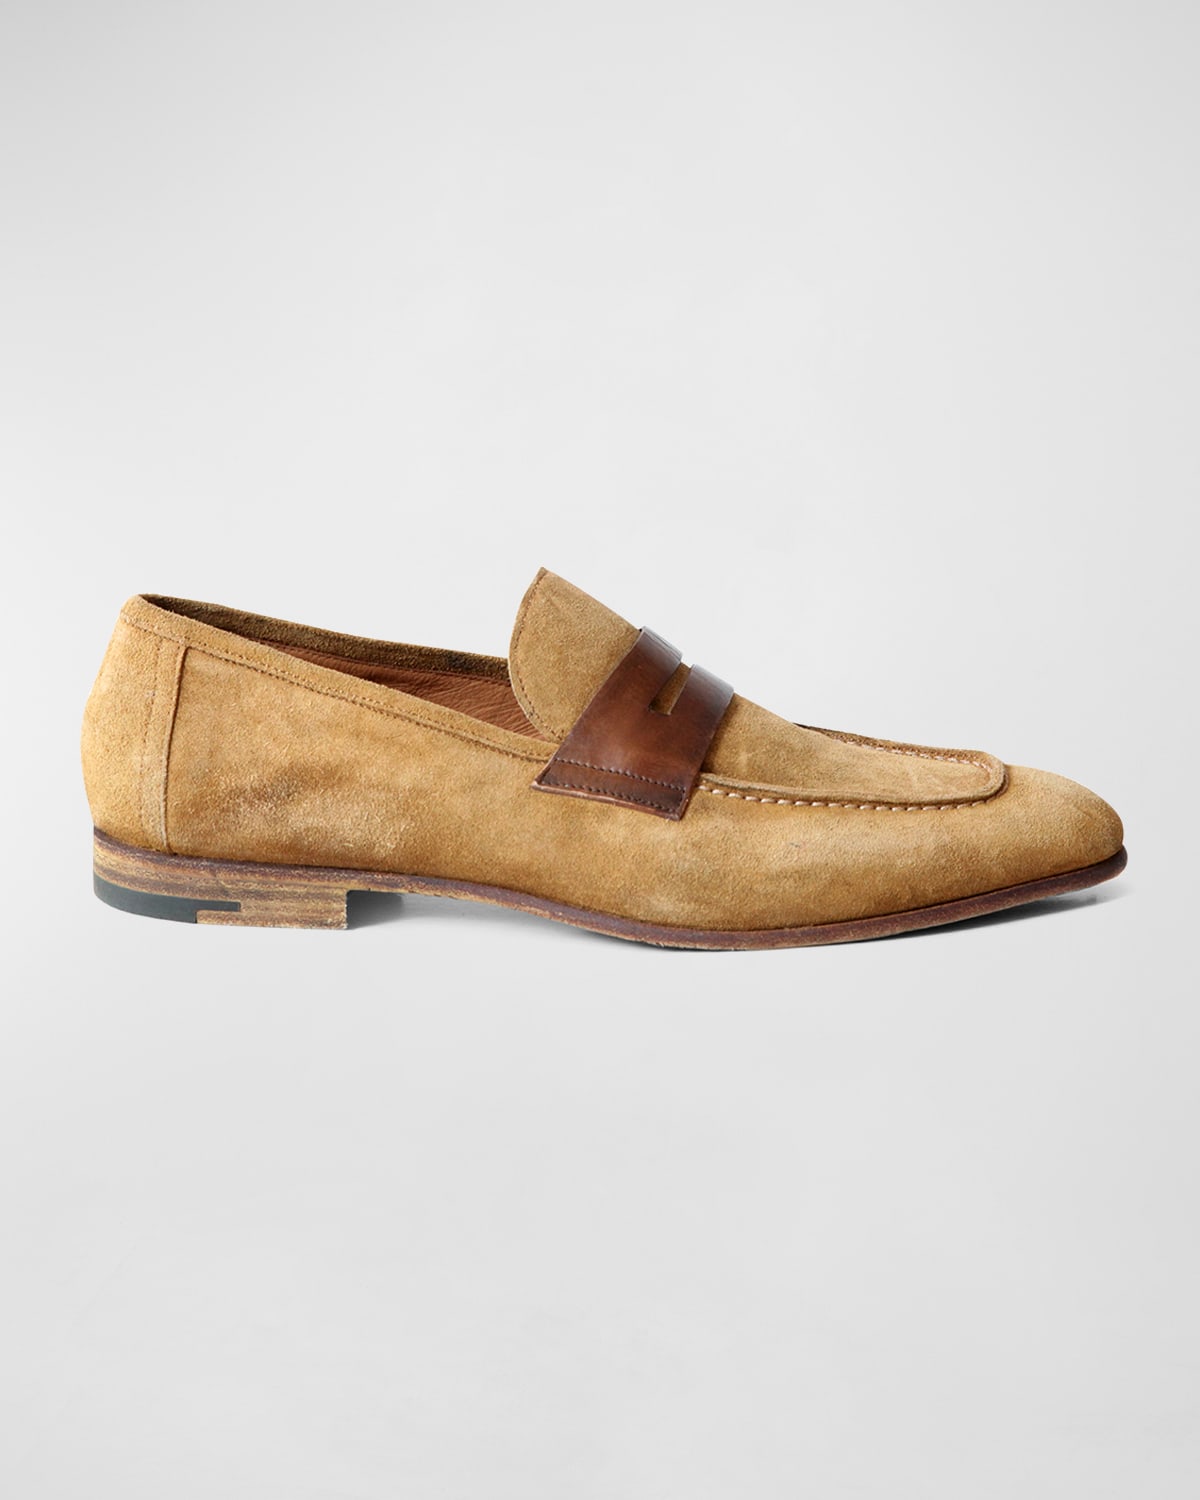 Jo Ghost Men's Suede-Leather Penny Loafers